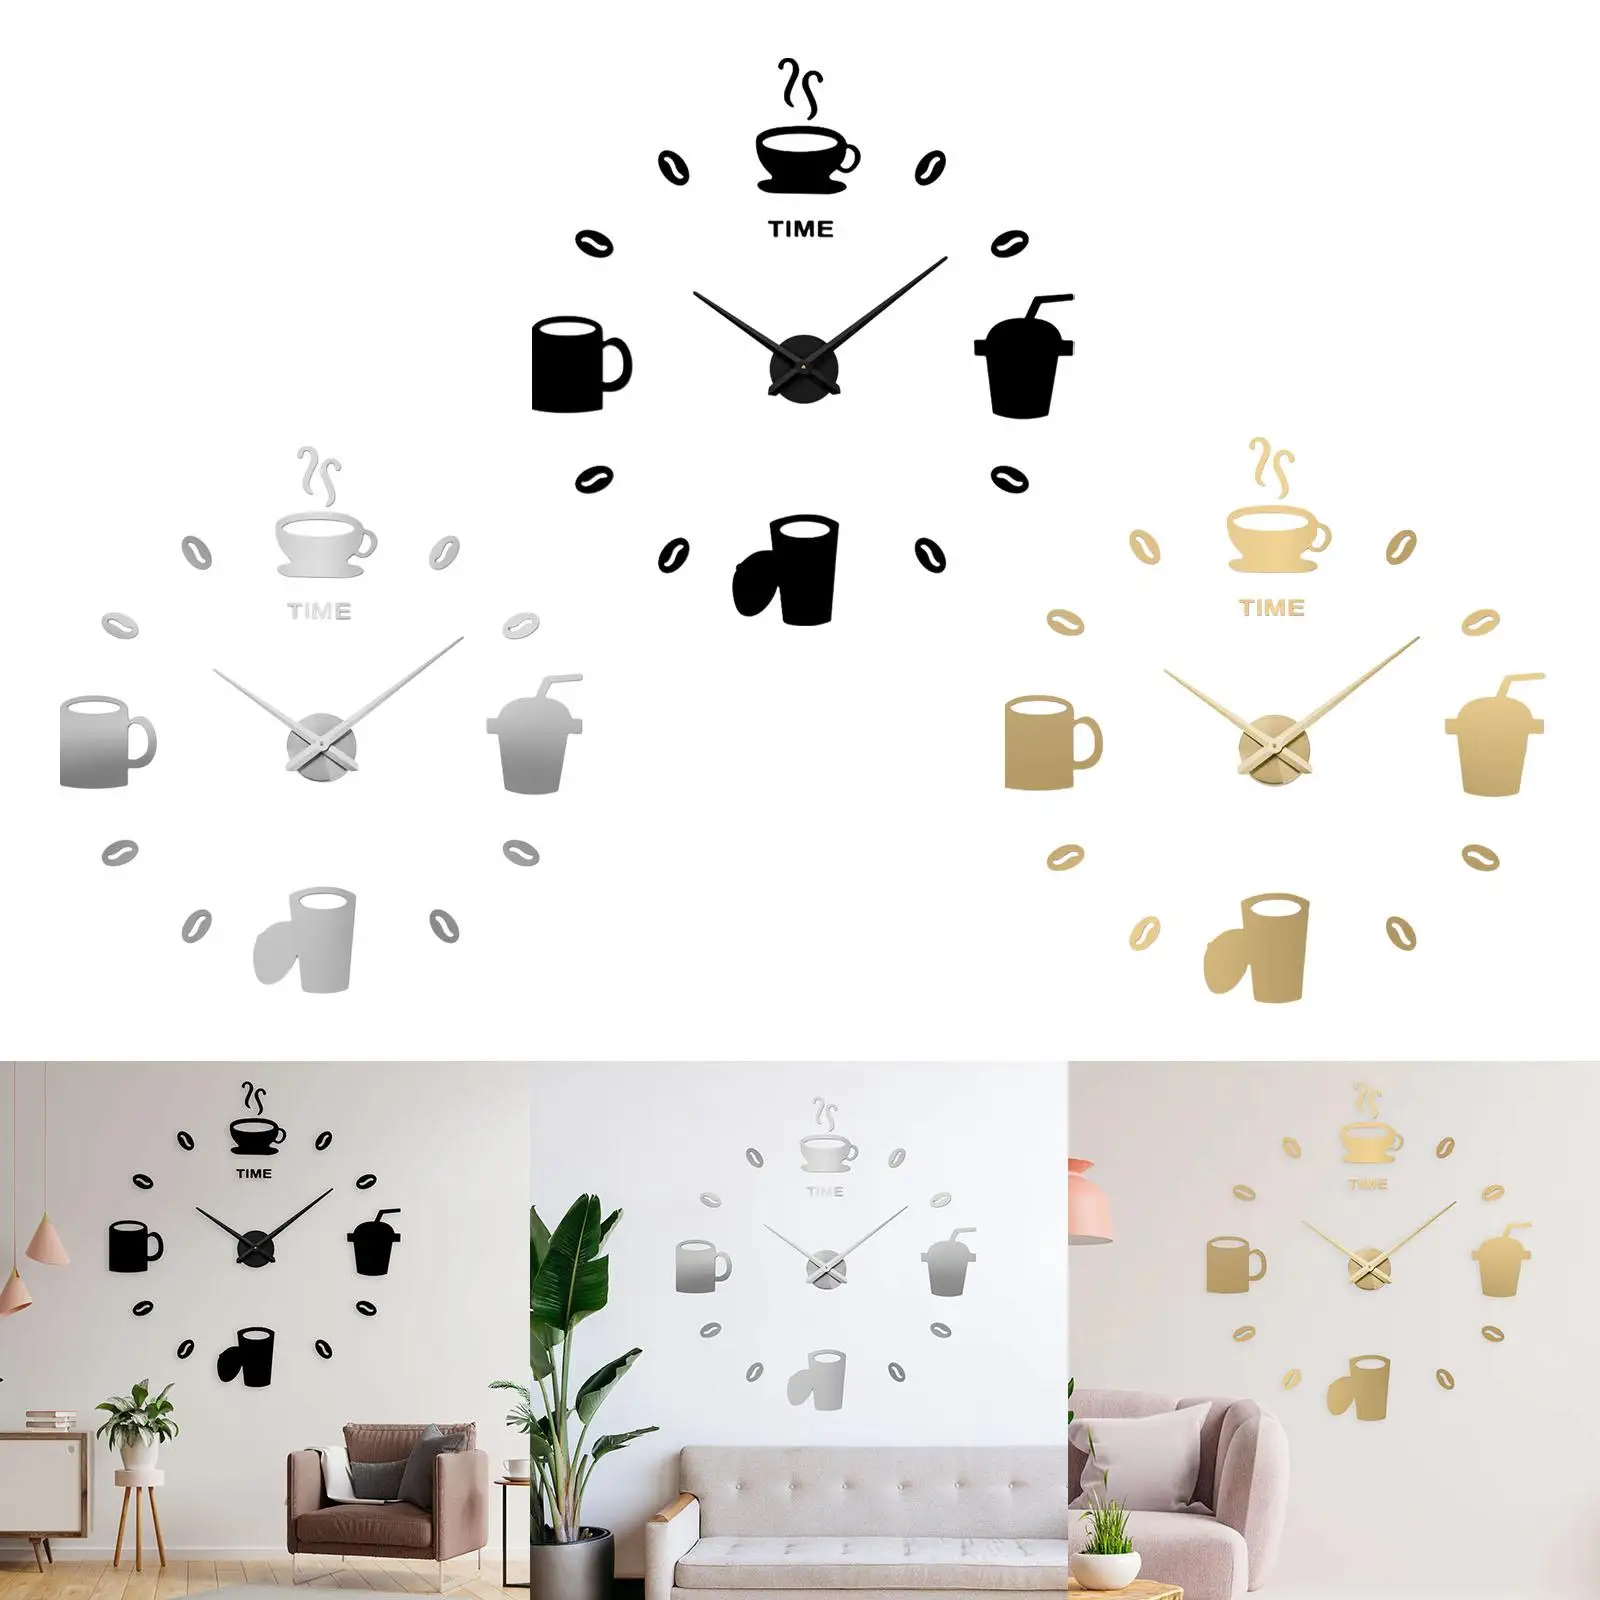 Acrylic DIY Wall Clock Stickers Decorative Battery Operated Minimalist Frameless Round Silent Office Kitchen Home Decoration